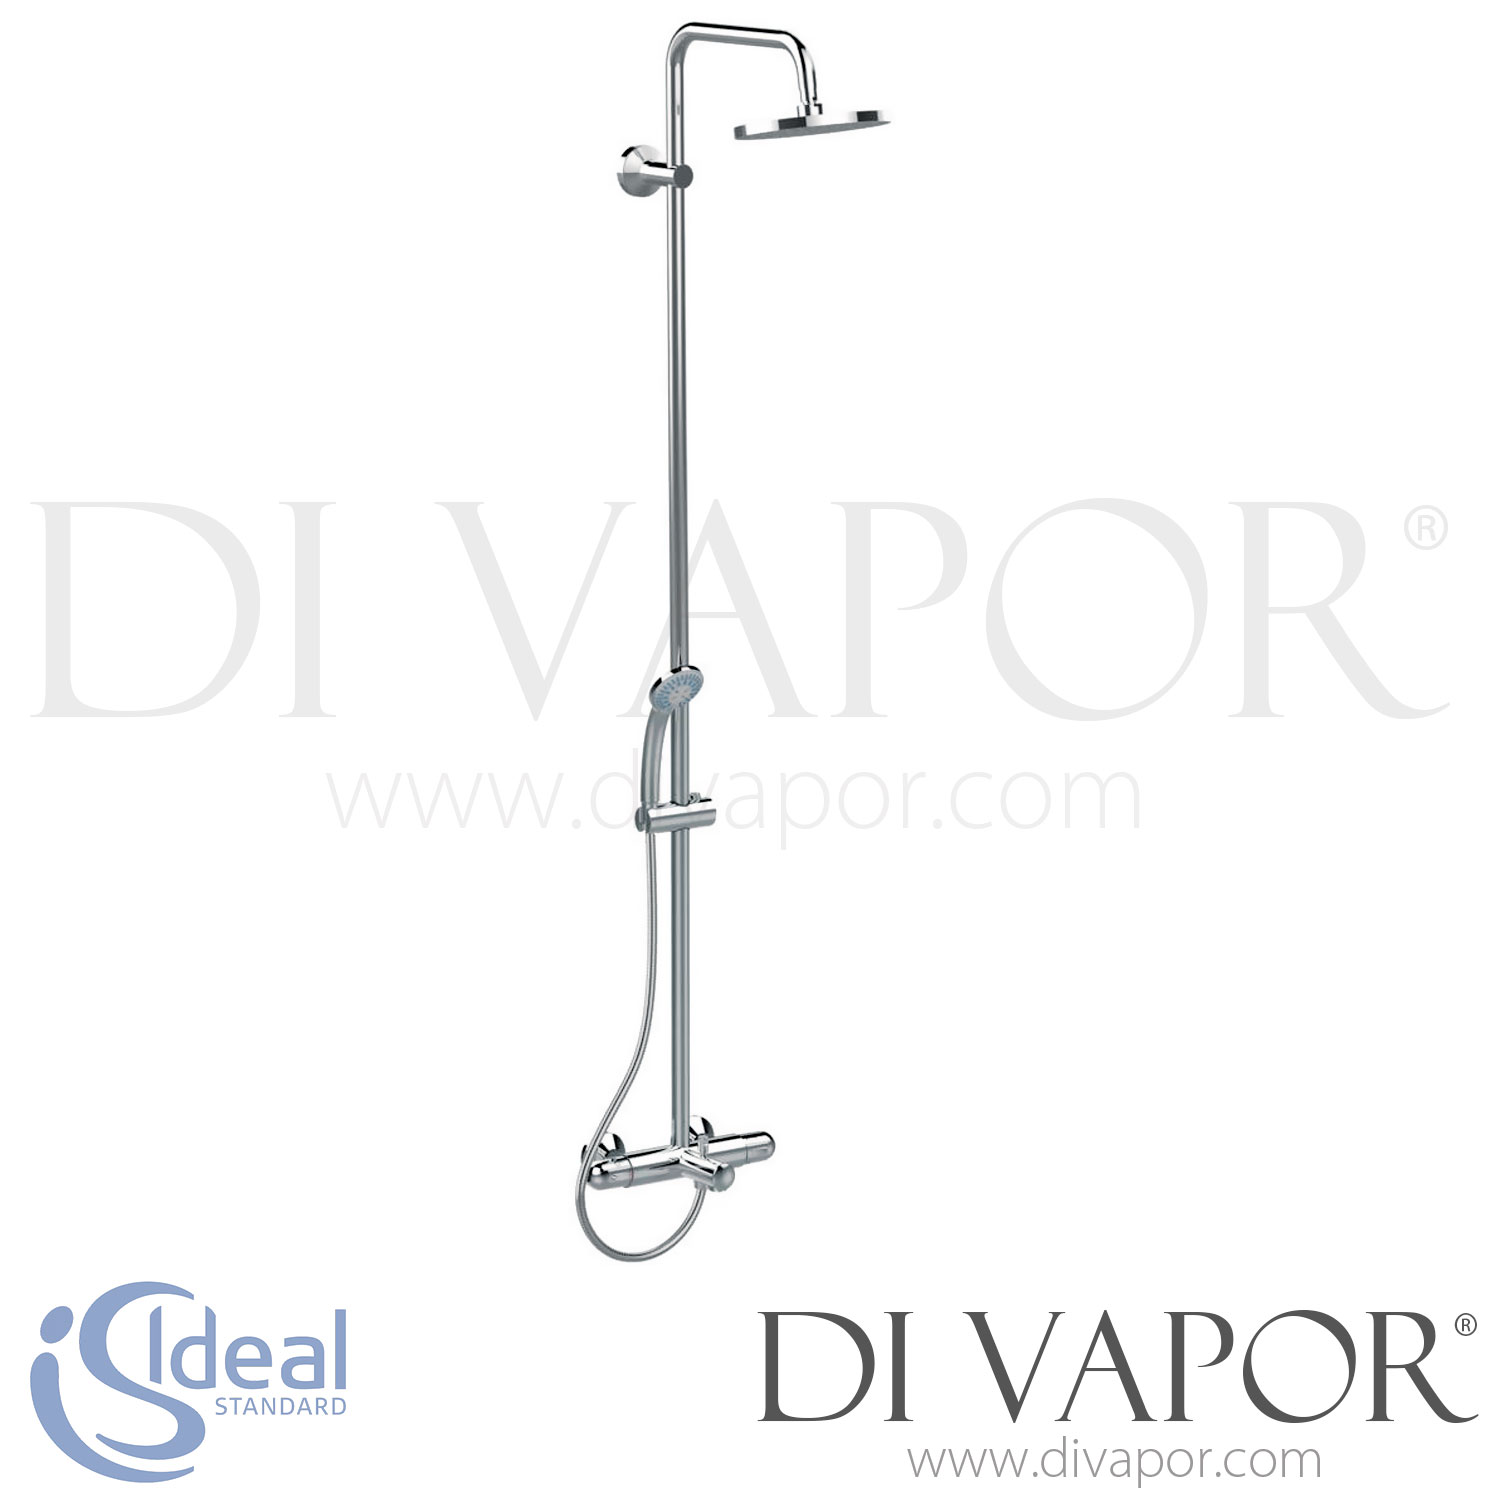 Ideal Standard Ceratherm 25 Exposed Bath Shower System Mixer Spare Parts